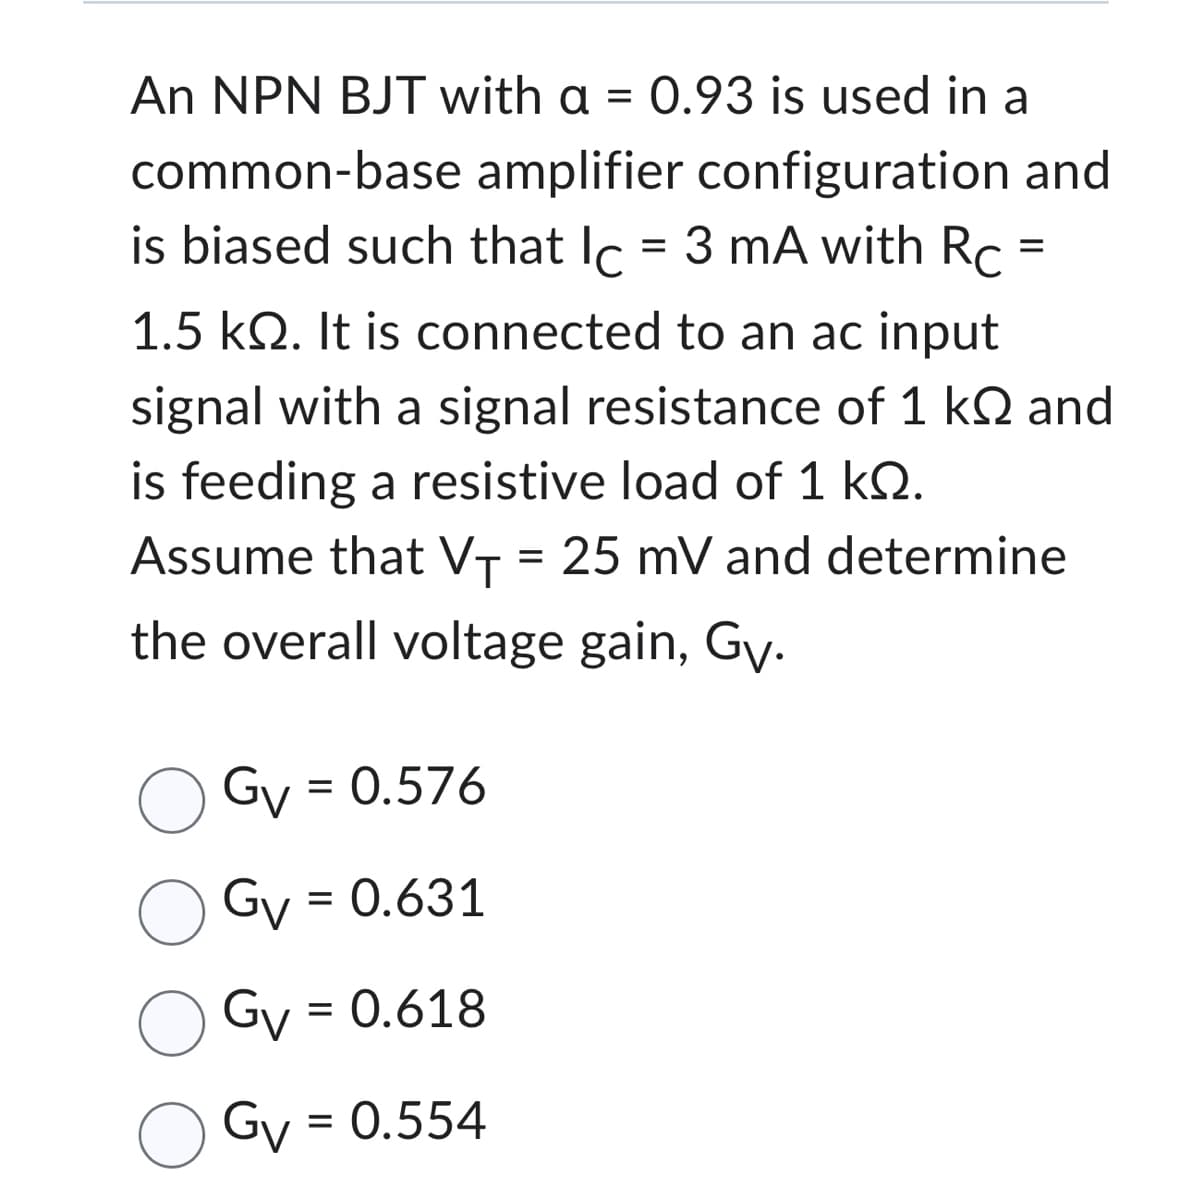 common-base
An NPN BJT with a = 0.93 is used in a
amplifier configuration and
is biased such that lc = 3 mA with Rc =
1.5 kQ2. It is connected to an ac input
signal with a signal resistance of 1 kQ and
is feeding a resistive load of 1 kQ.
Assume that V₁ = 25 mV and determine
the overall voltage gain, Gy.
Gv = 0.576
Gv = 0.631
Gv = 0.618
Gv = 0.554